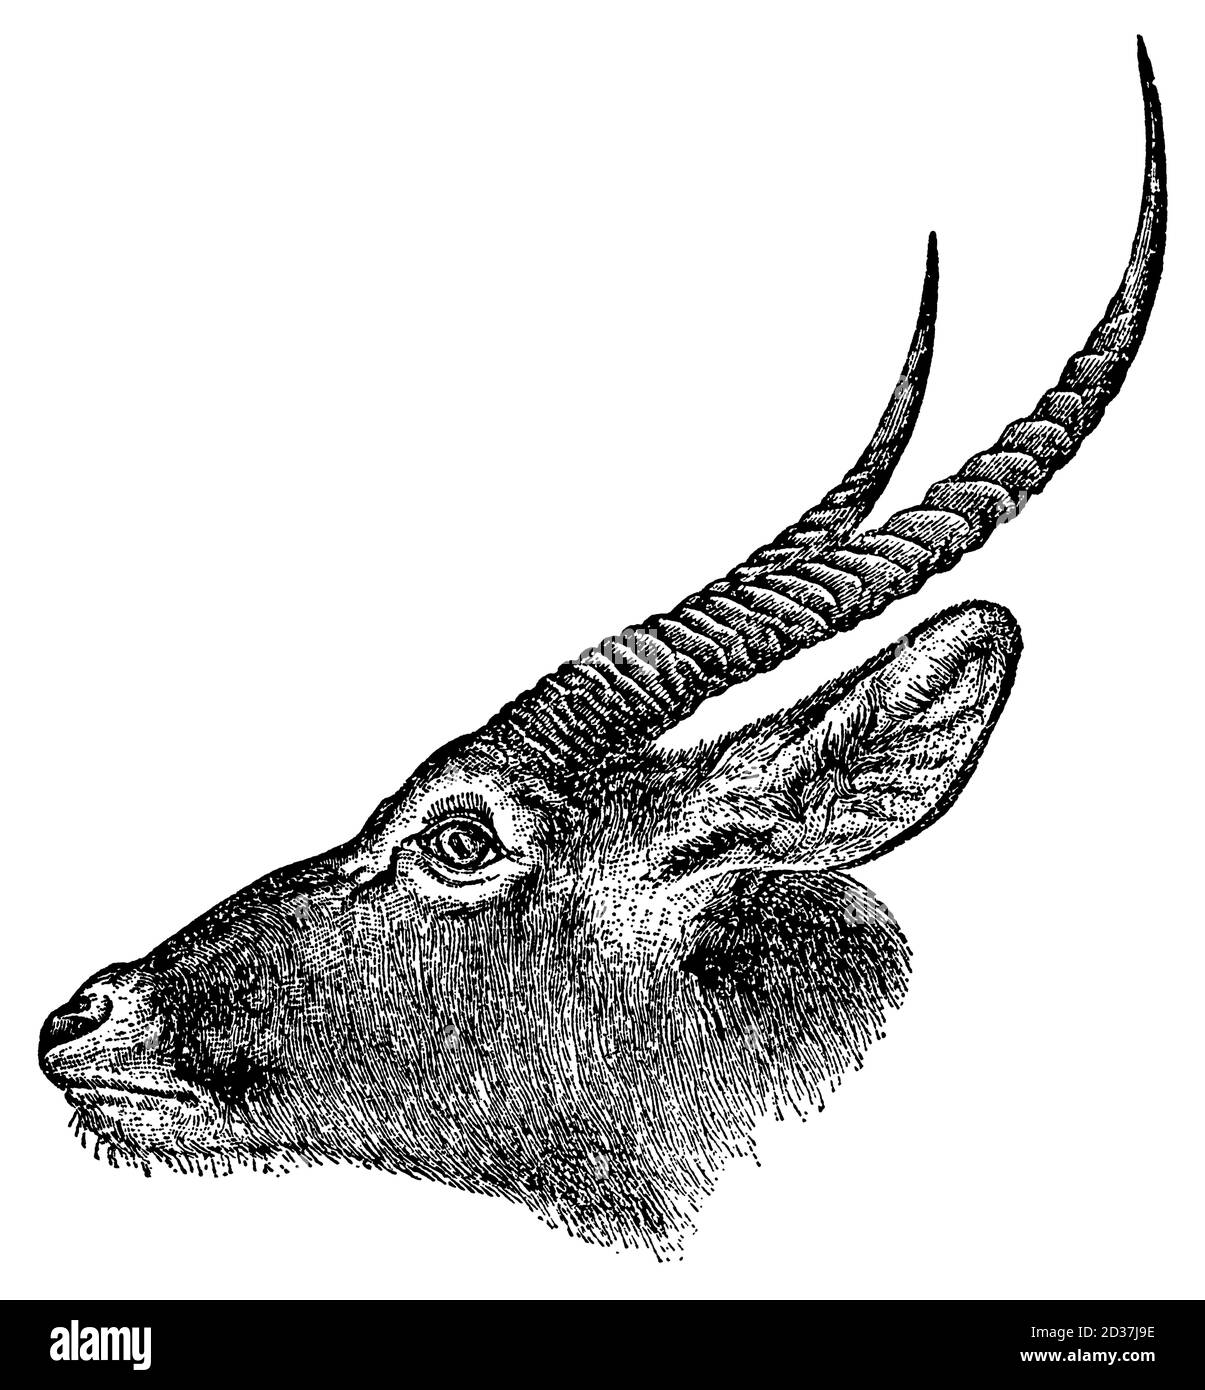 Classic engraving of a goat' head (isolated on white). Published in Systematischer Bilder-Atlas zum Conversations-Lexikon, Ikonographische Encyklopaed Stock Photo